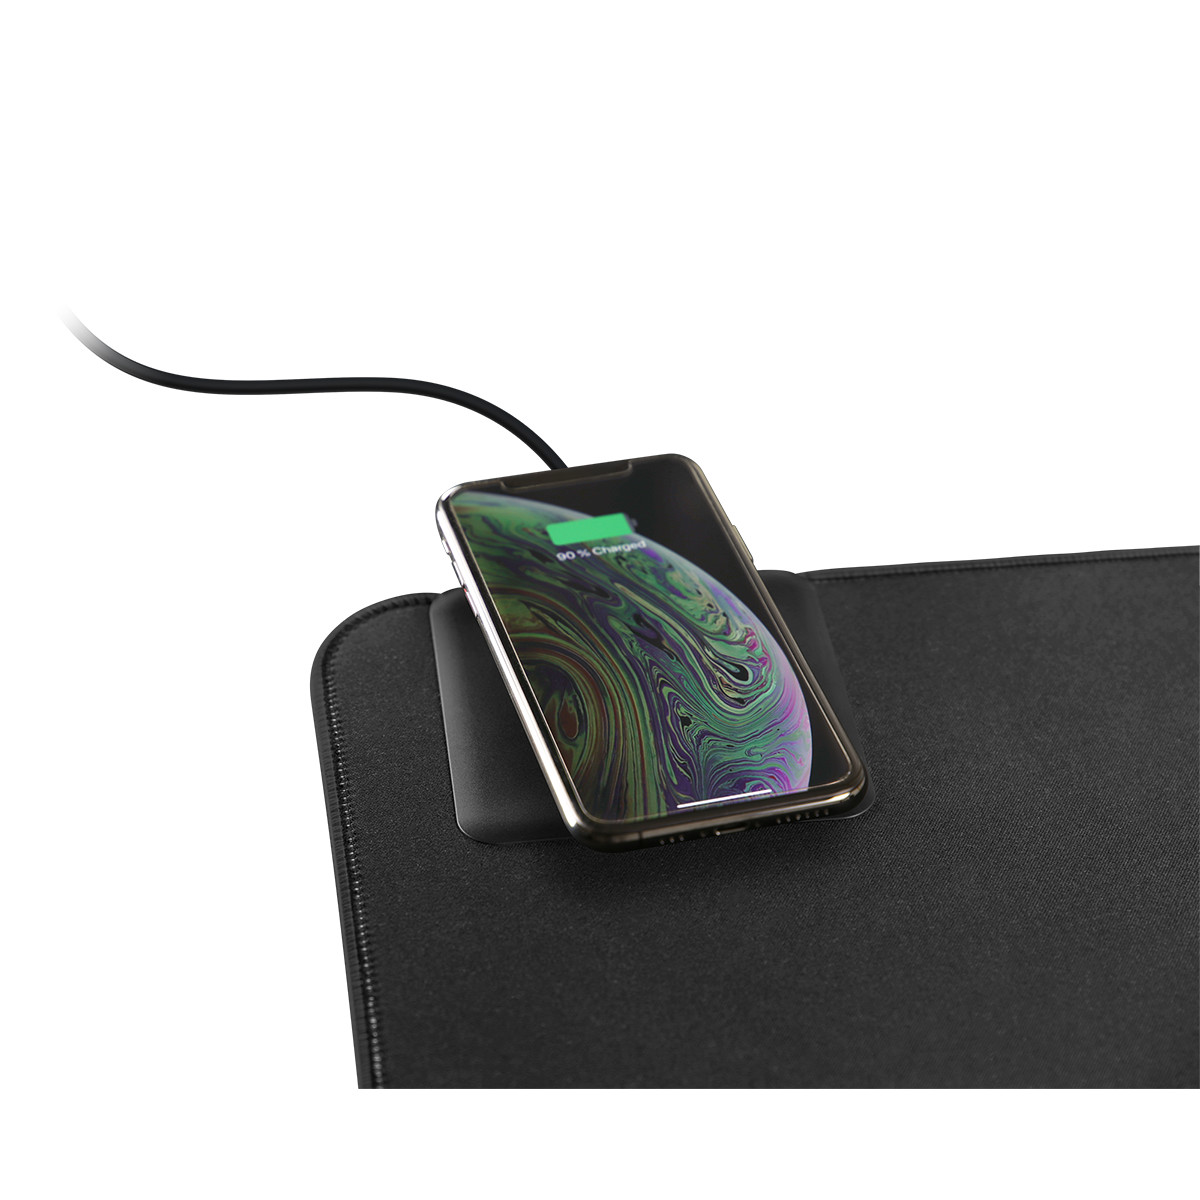 DELTACO Office, extra wide mousepad with fast wireless charger, 90x40